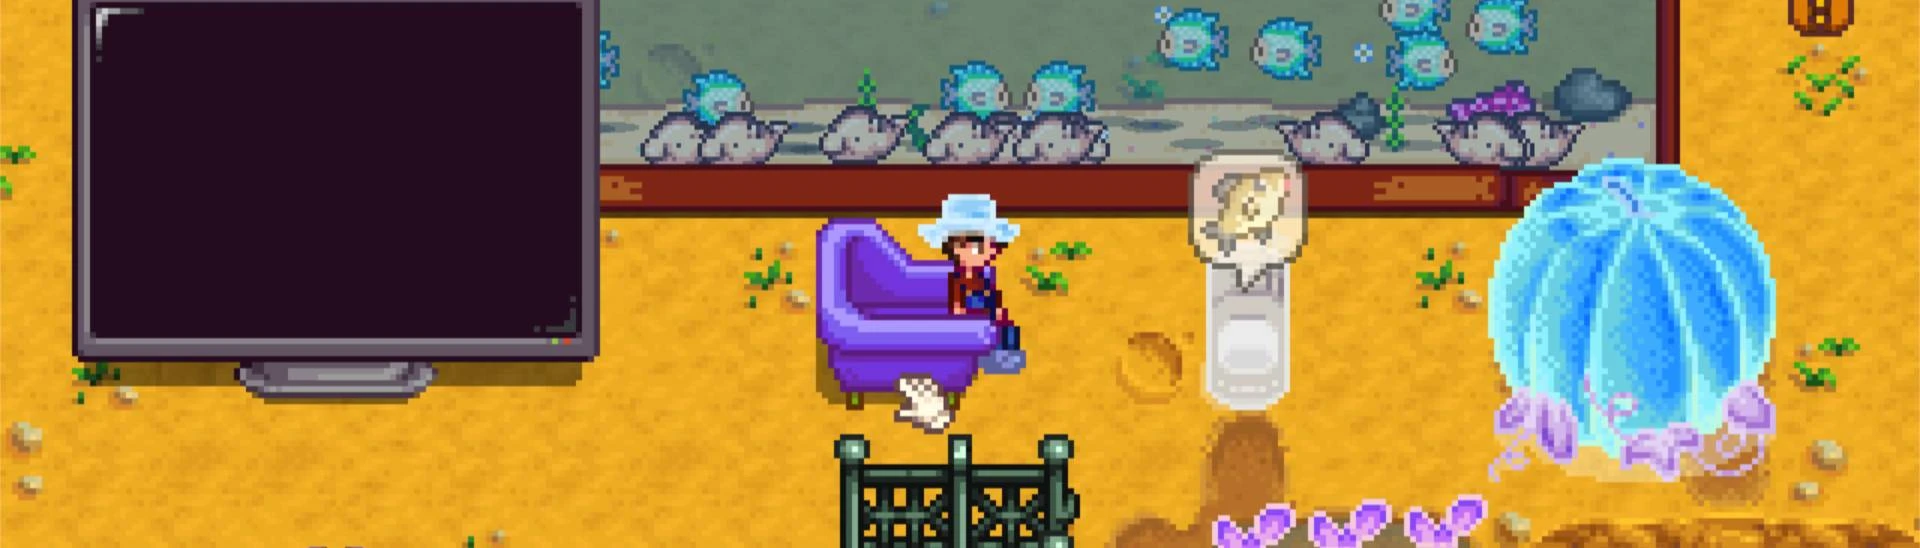 Do you know any other games like the mines on stardew? They are my fav part  of the game and i would like more like this : r/StardewValley